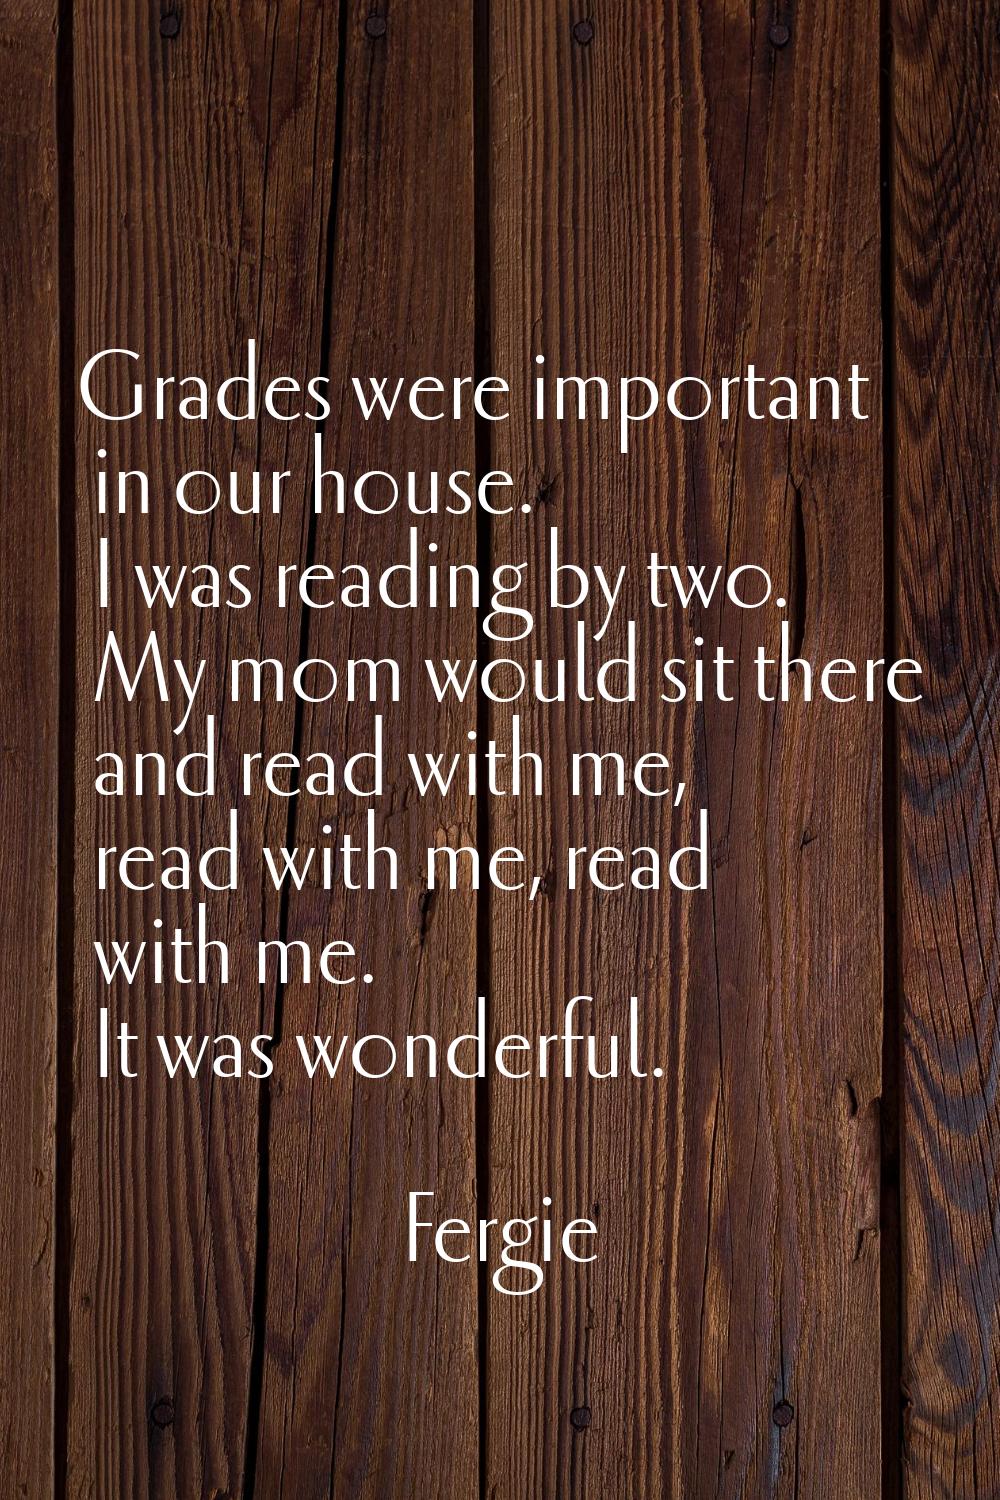 Grades were important in our house. I was reading by two. My mom would sit there and read with me, 